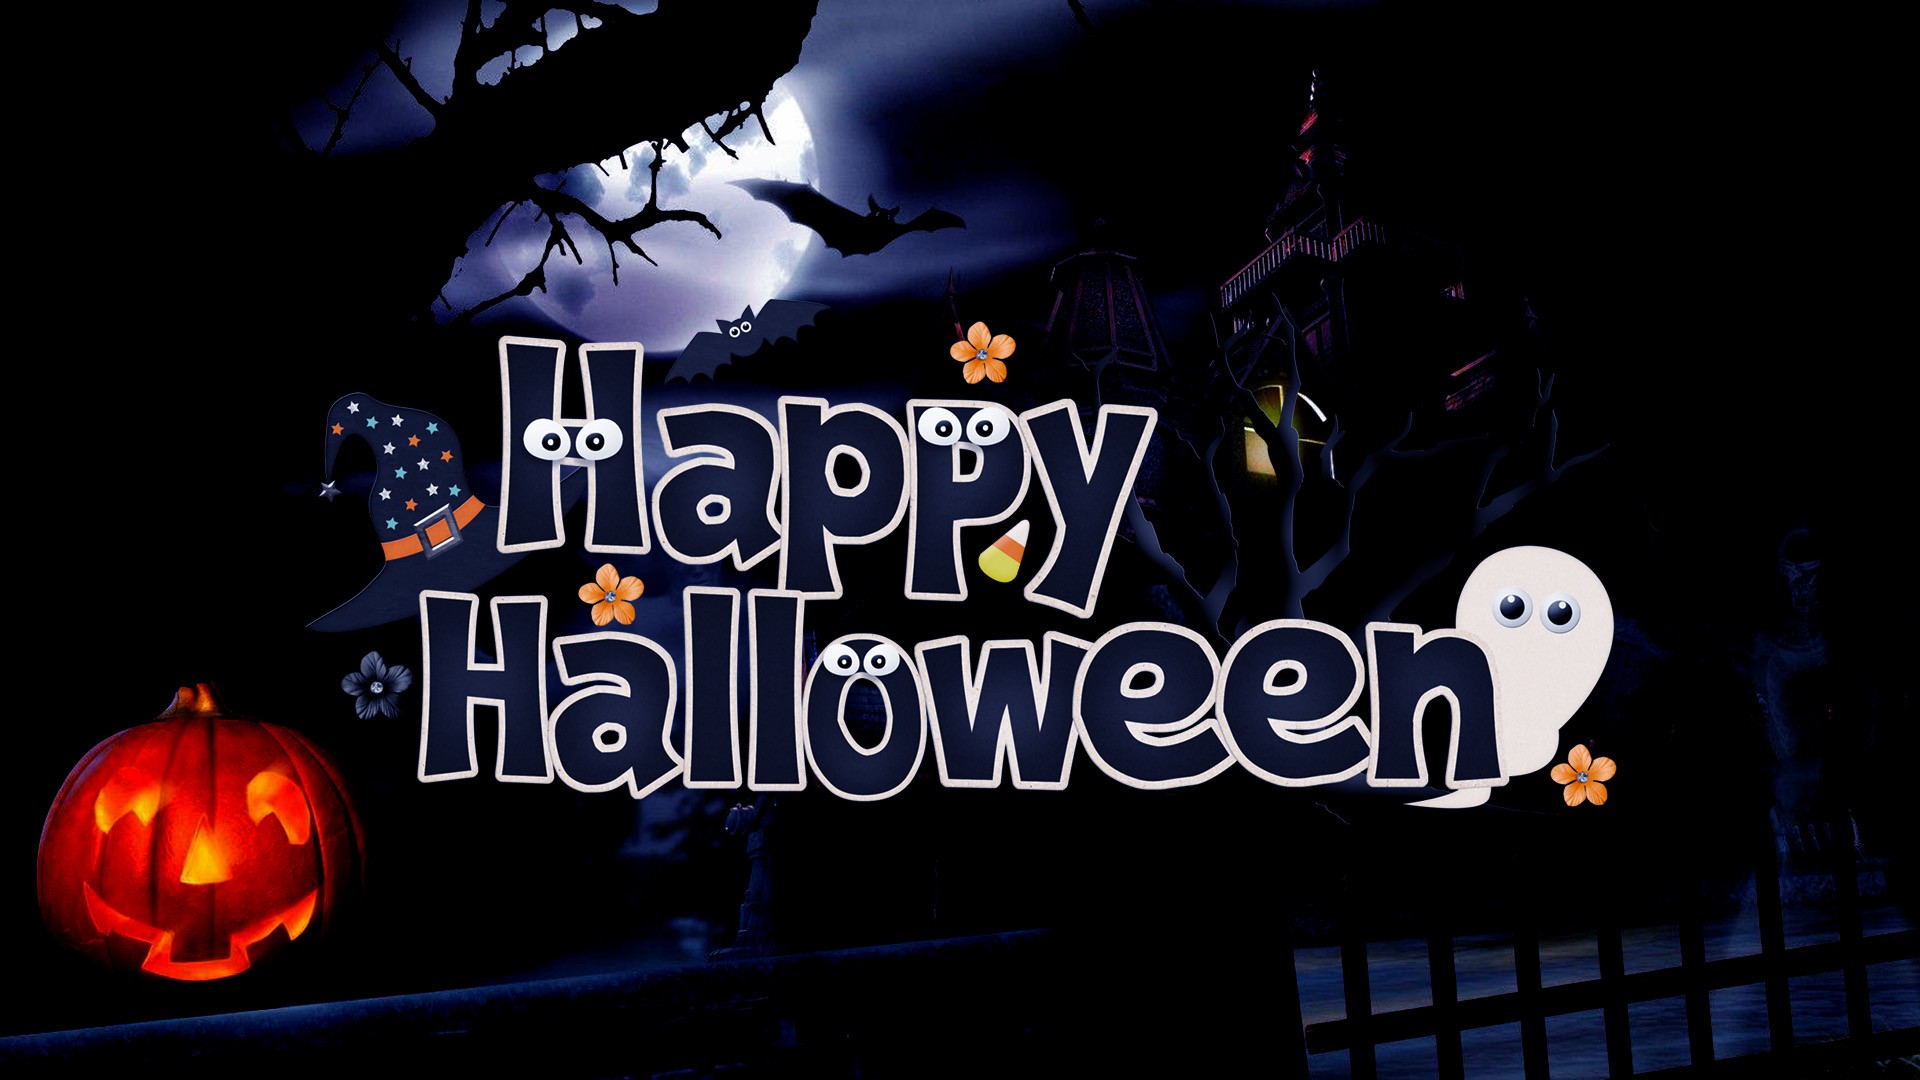 Download free Happy Halloween Wallpaper HD 34830 available in different hig...